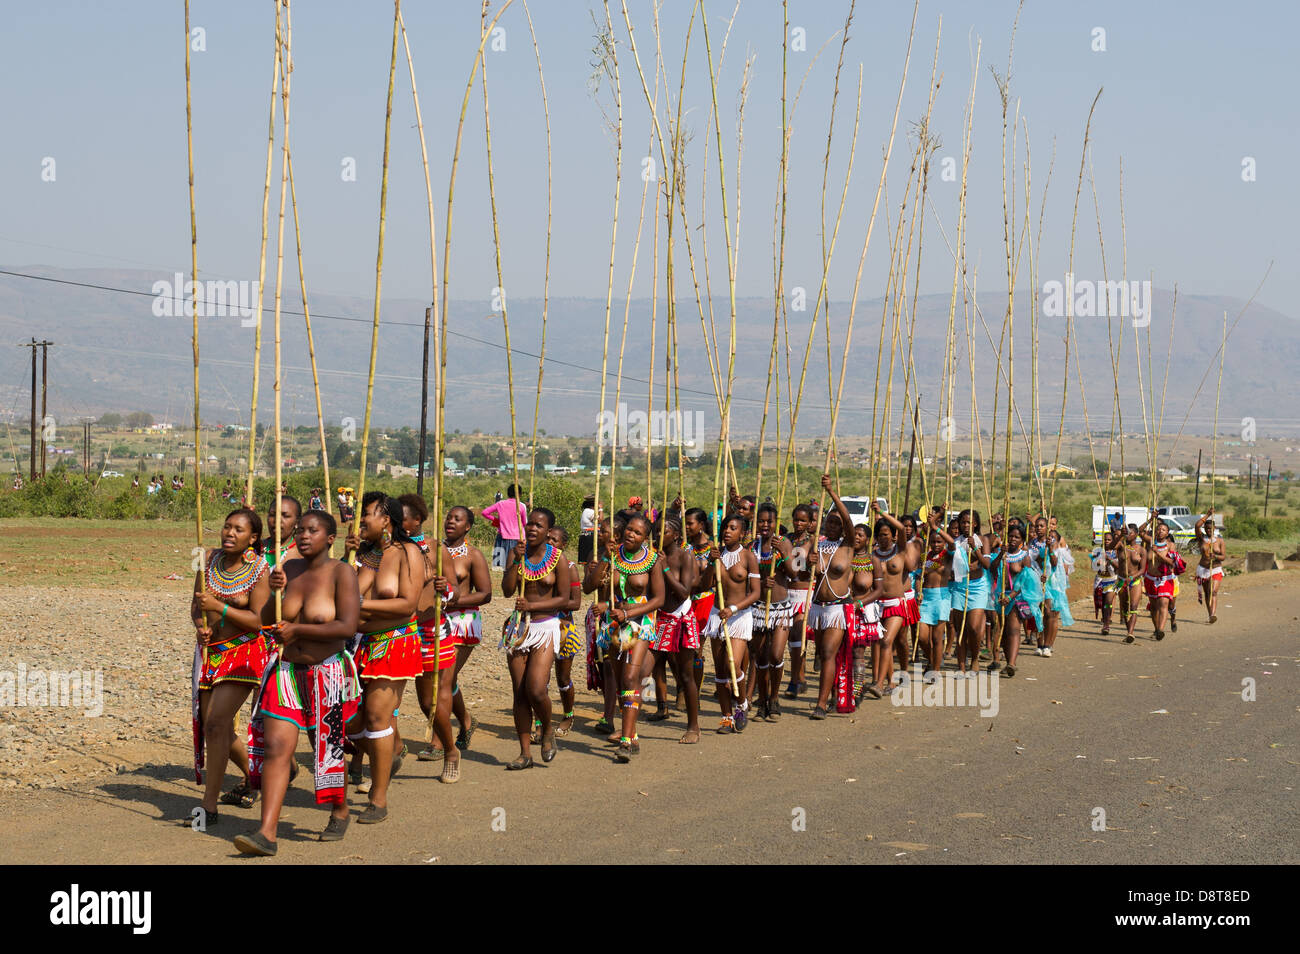 Zulu Maidens Deliver Reed Sticks To The King Zulu Reed Dance At